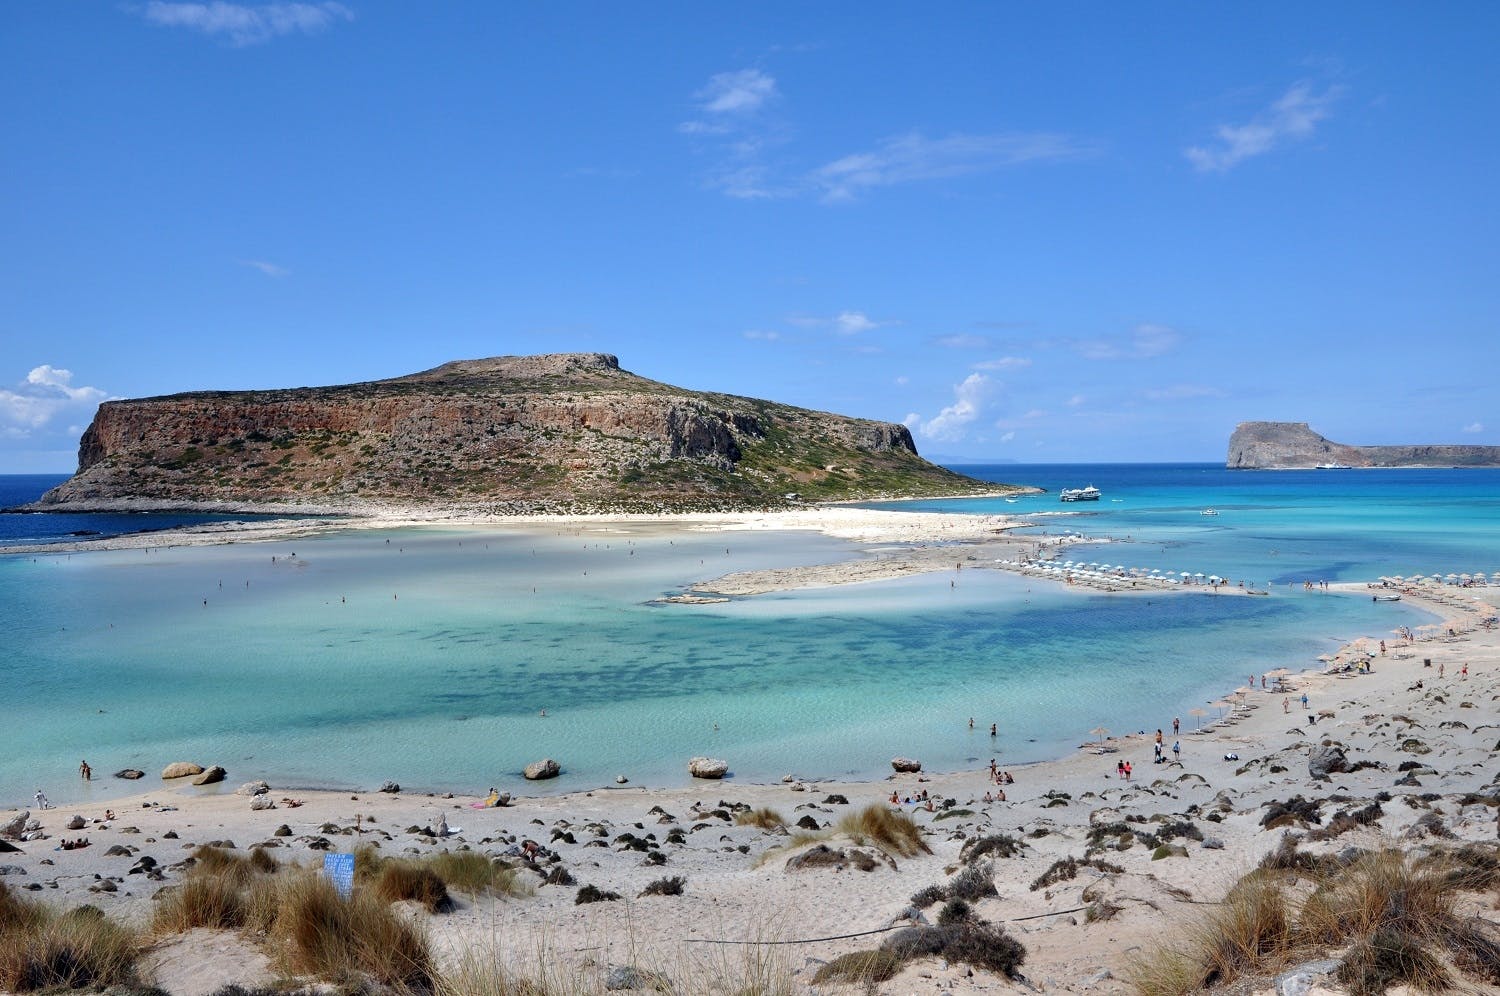 Gramvousa and Balos guided tour from Rethymno and Chania